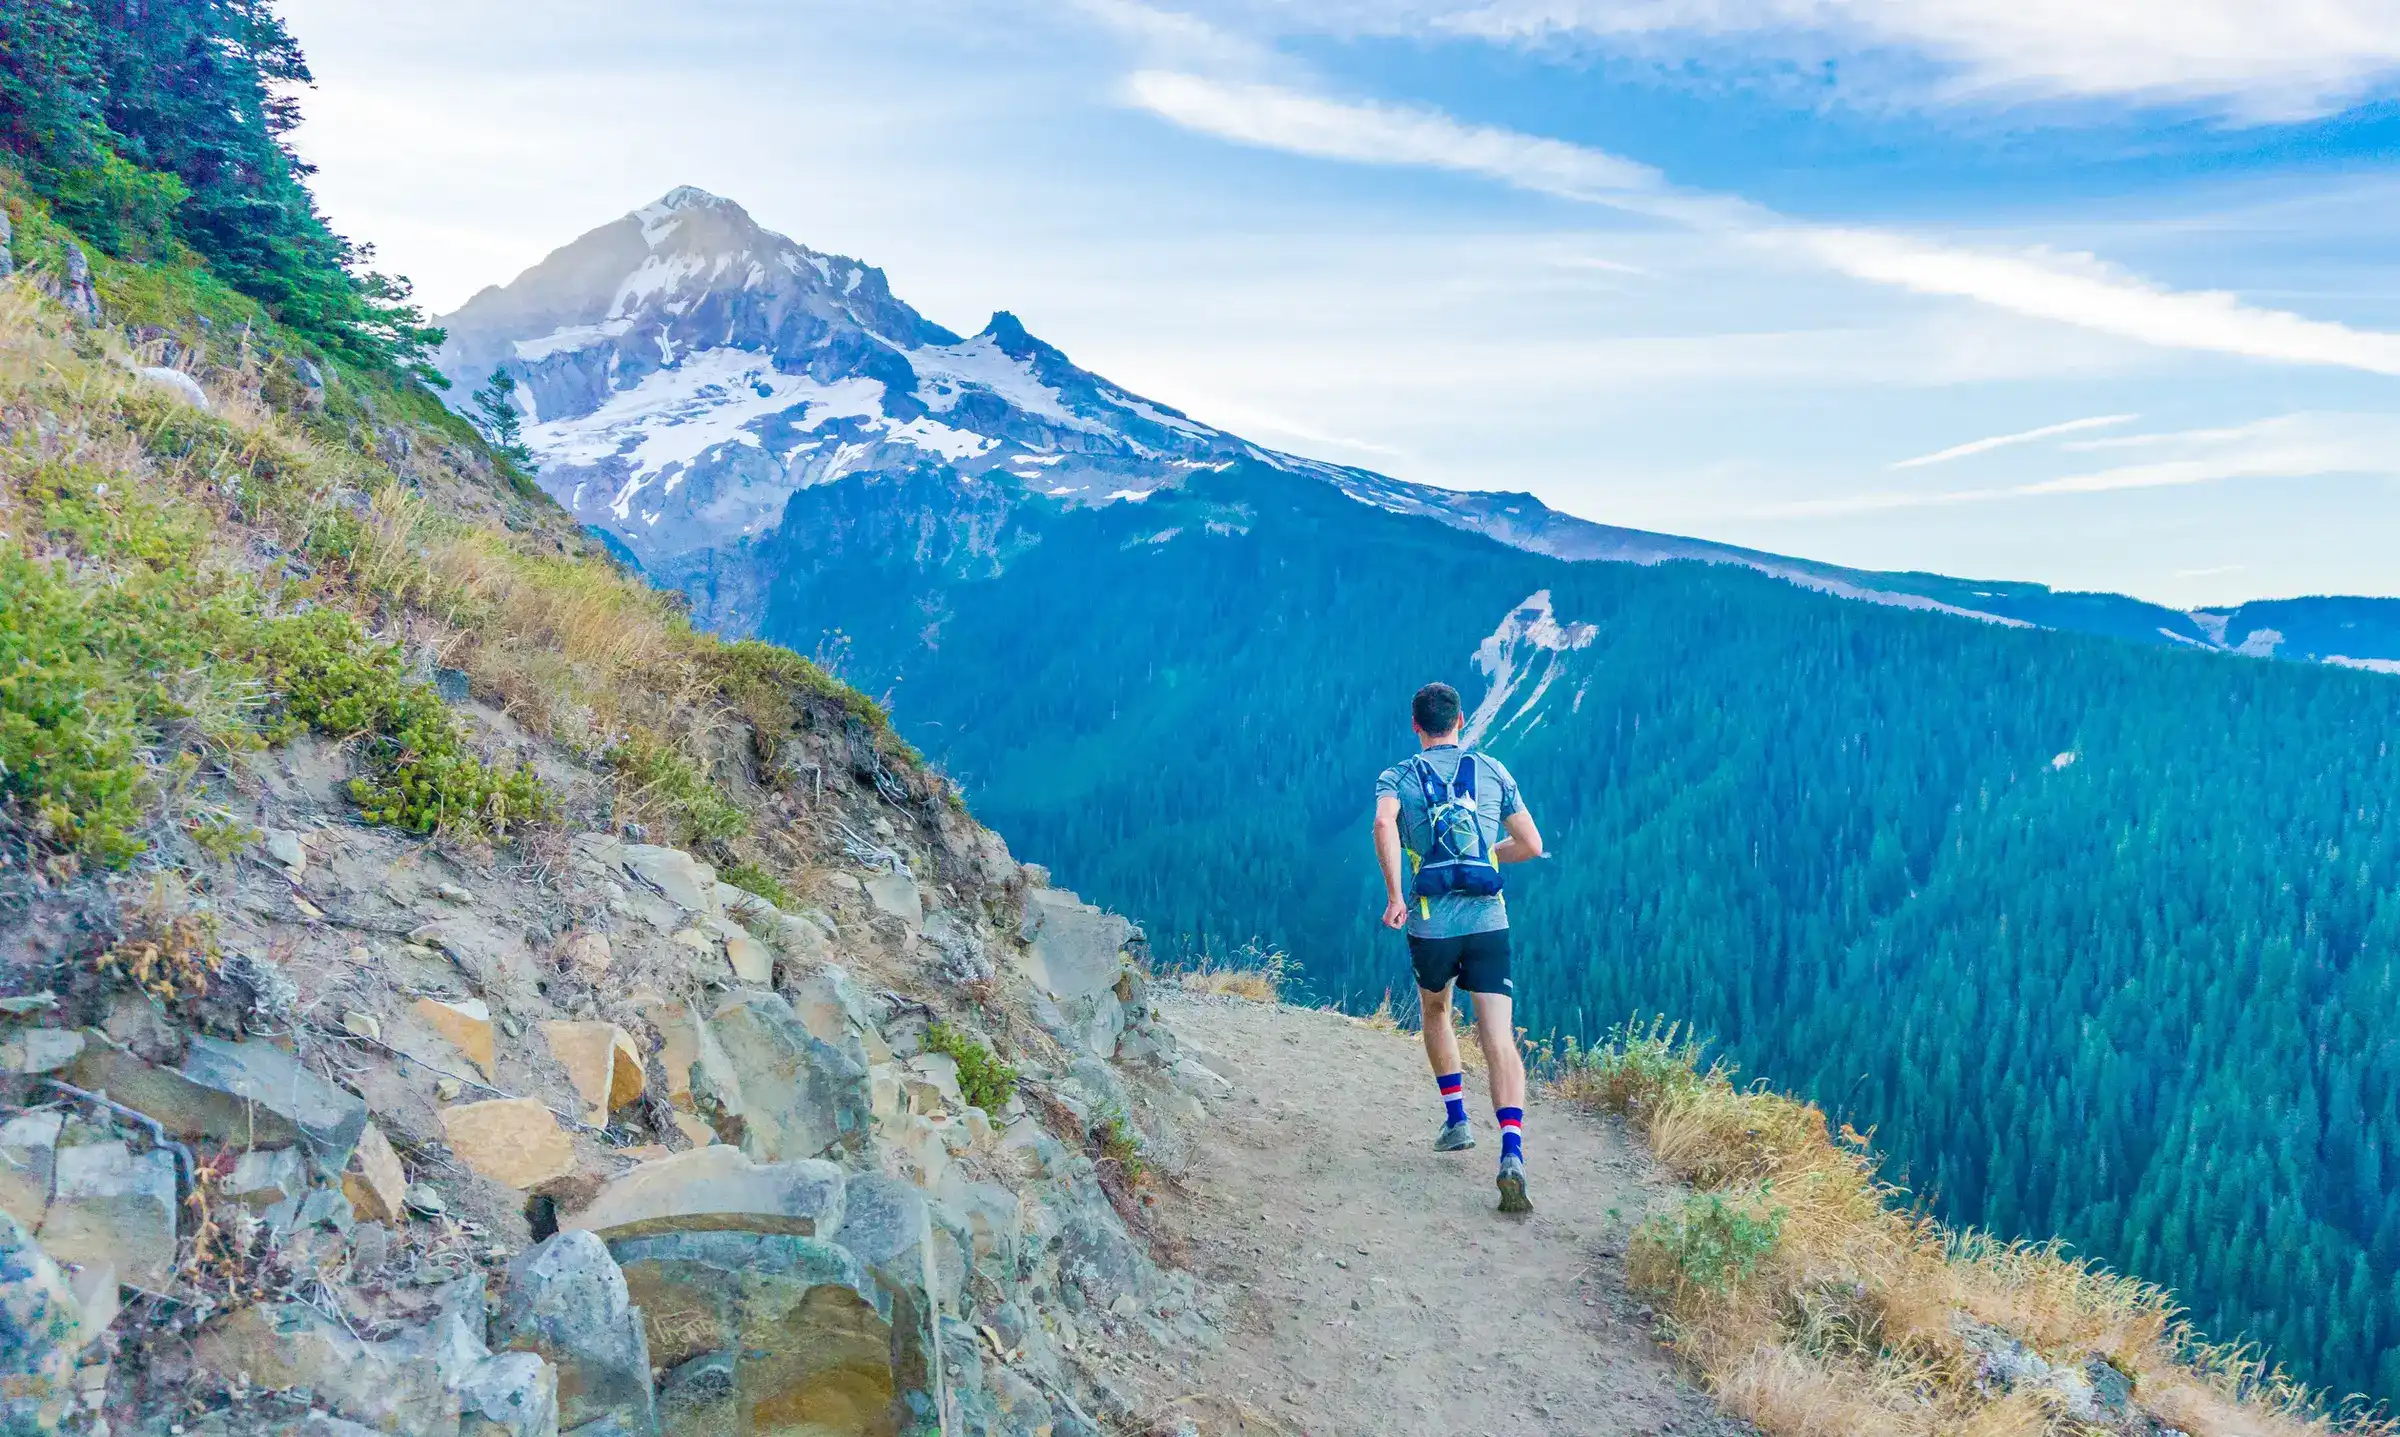 Trail runner going uphill with a mountain in the backdrop